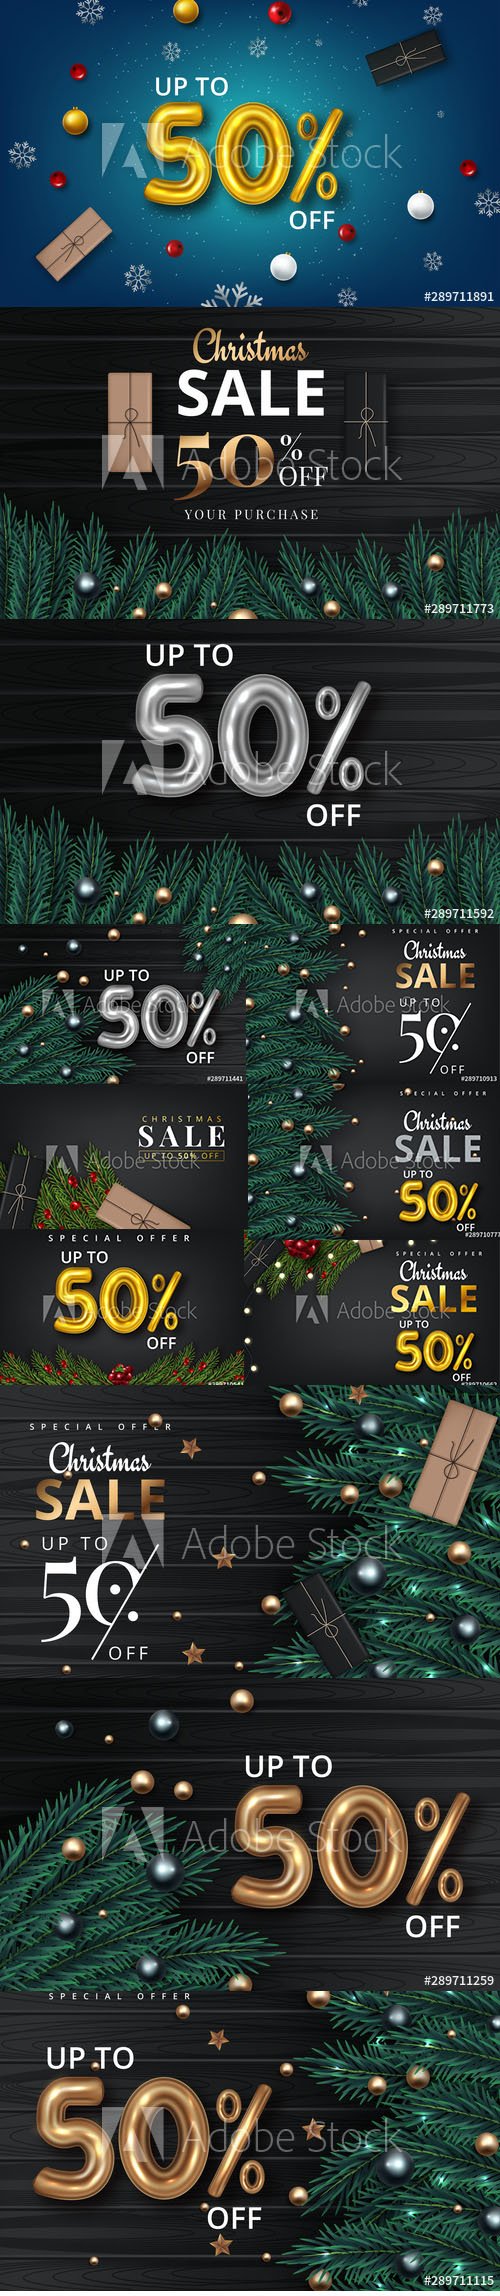 Christmas Sale Promotional Banner for Winter Holiday